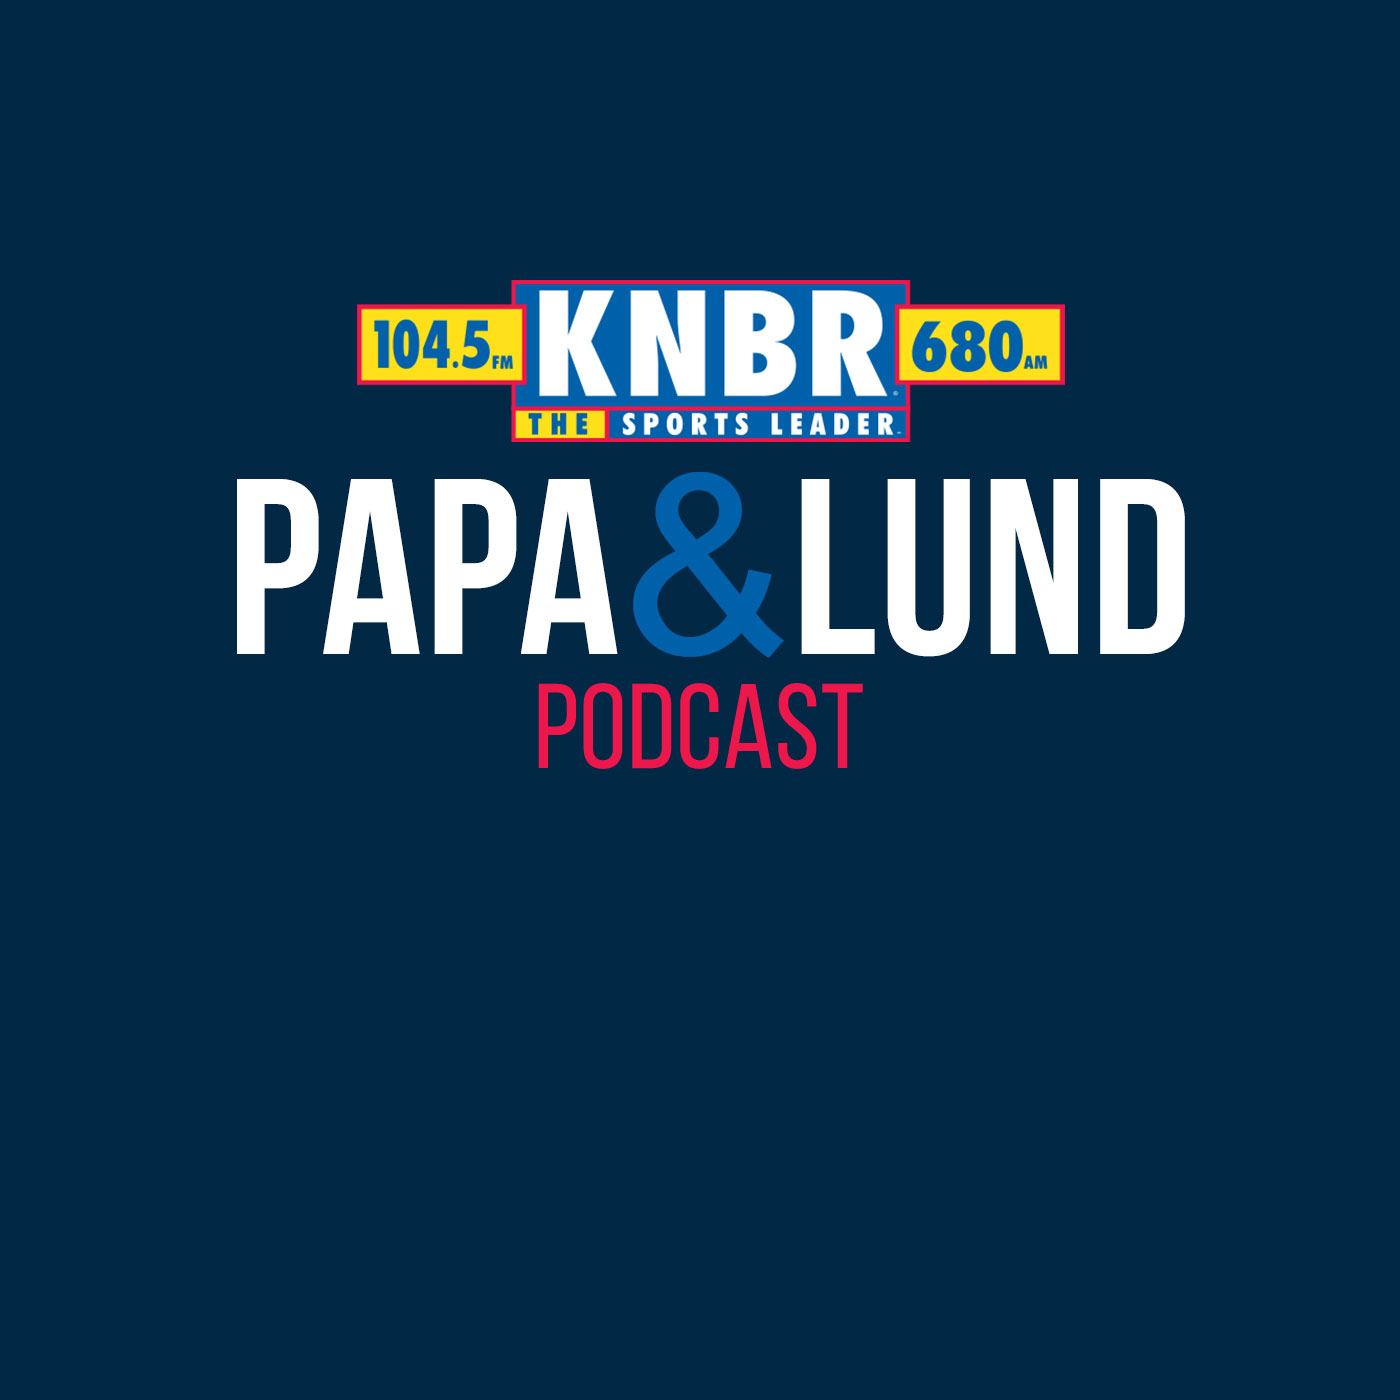 11-29 Asante Samuel joins Papa & Lund to discuss the Deebo Samuel calling out the Eagles secondary and if the 49ers offense could meet the challenge through the air